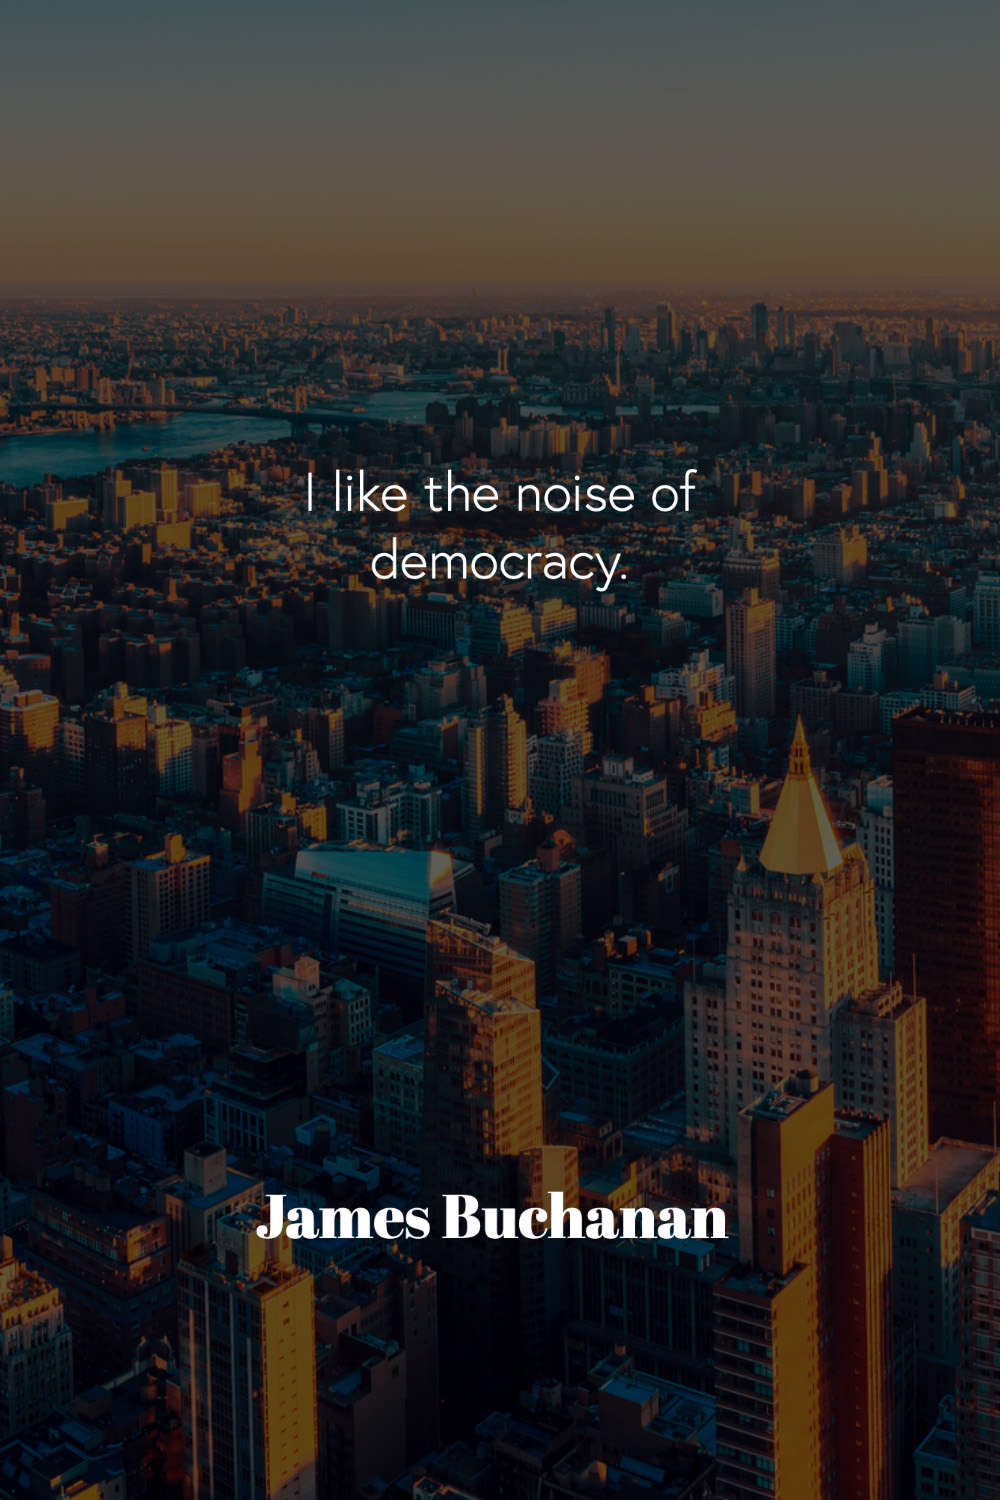 Quote by James Buchanan